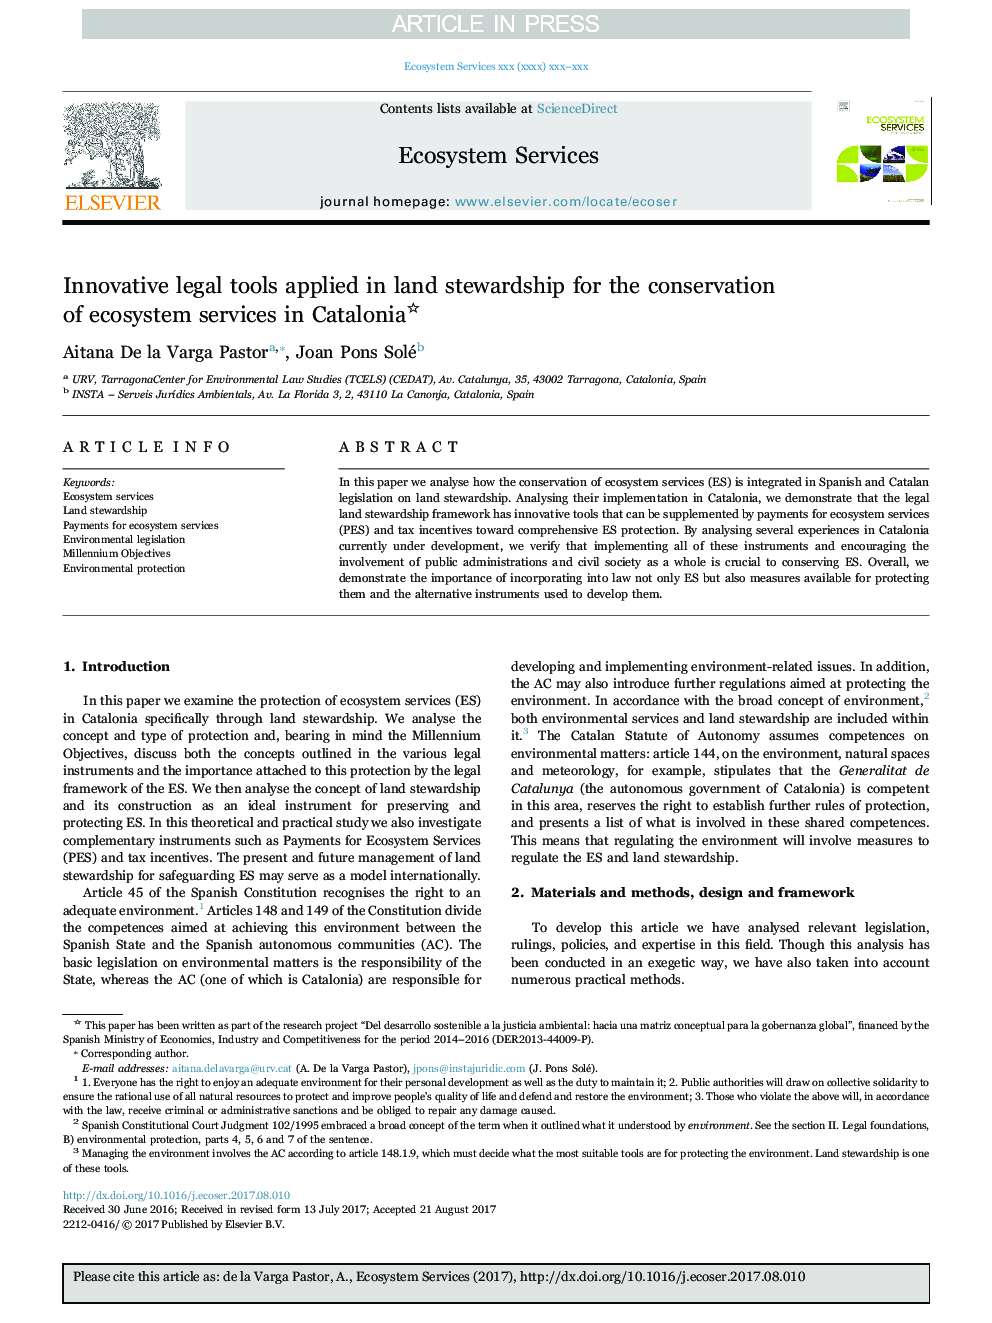 Innovative legal tools applied in land stewardship for the conservation of ecosystem services in Catalonia